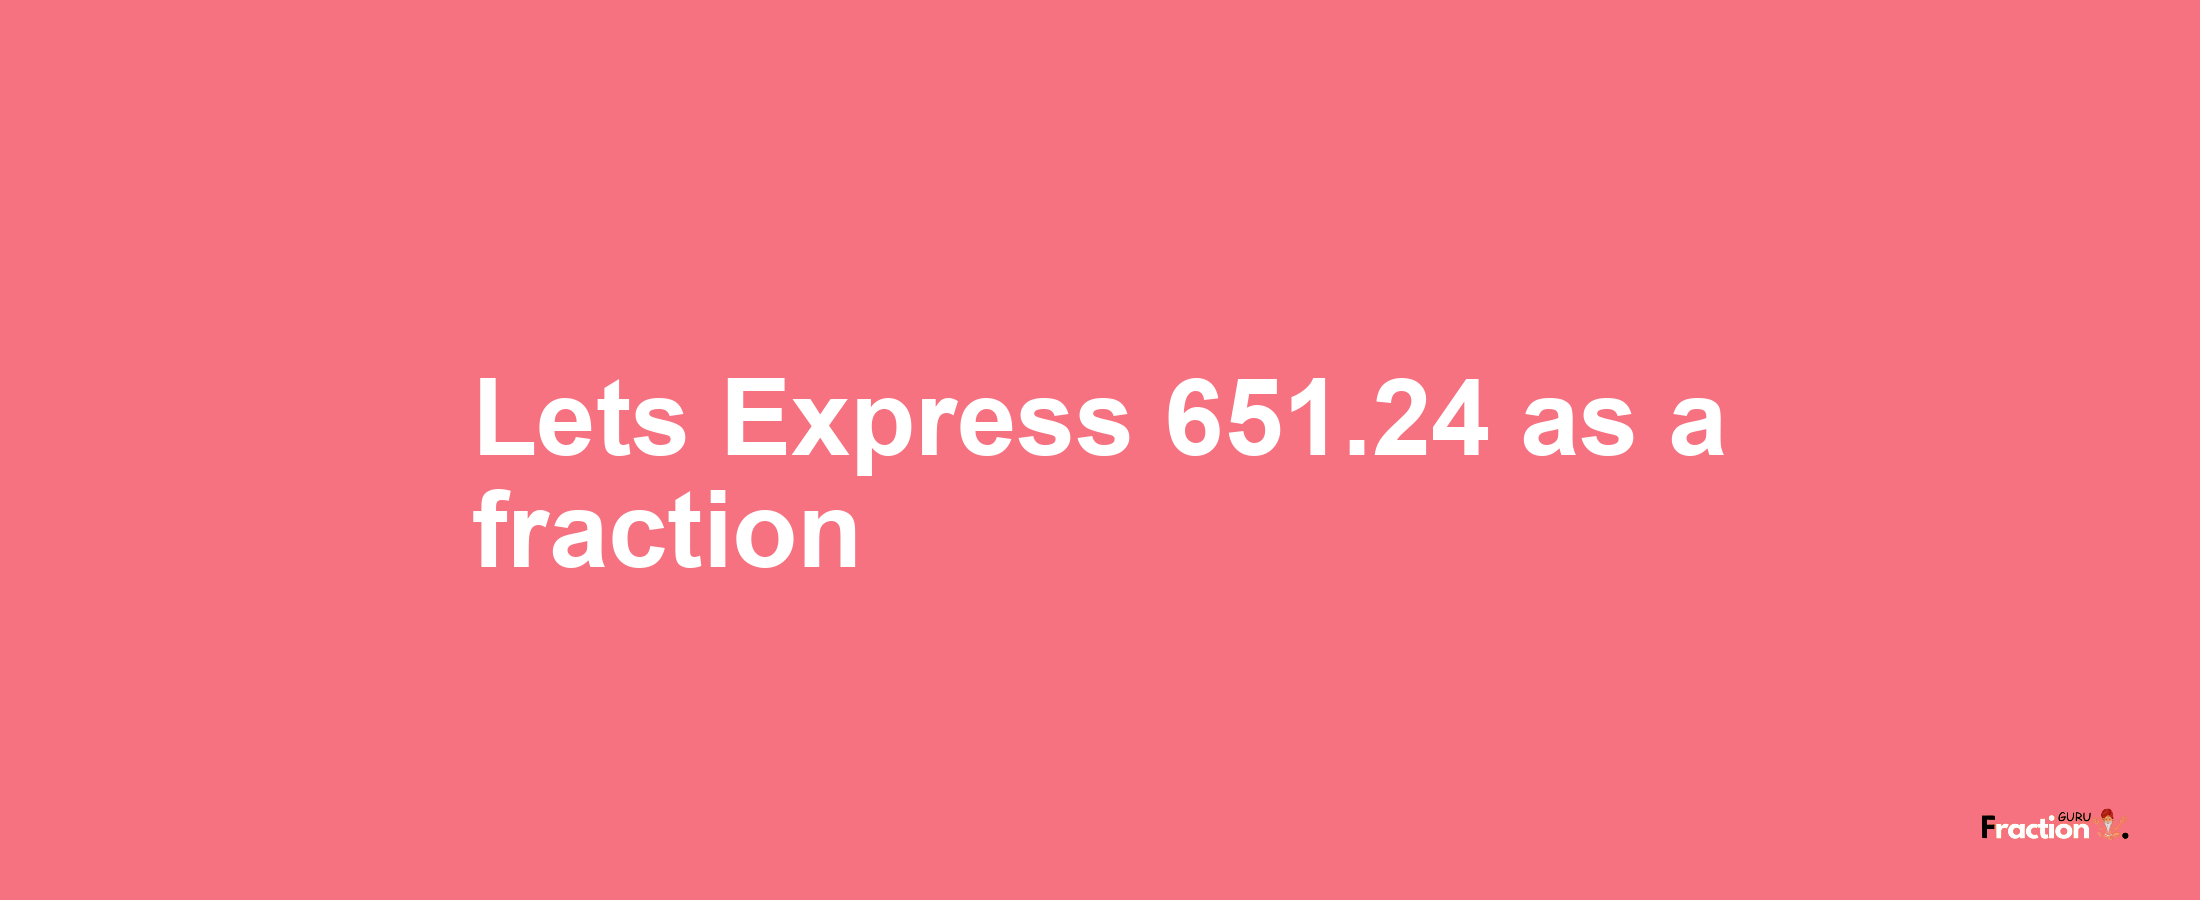 Lets Express 651.24 as afraction